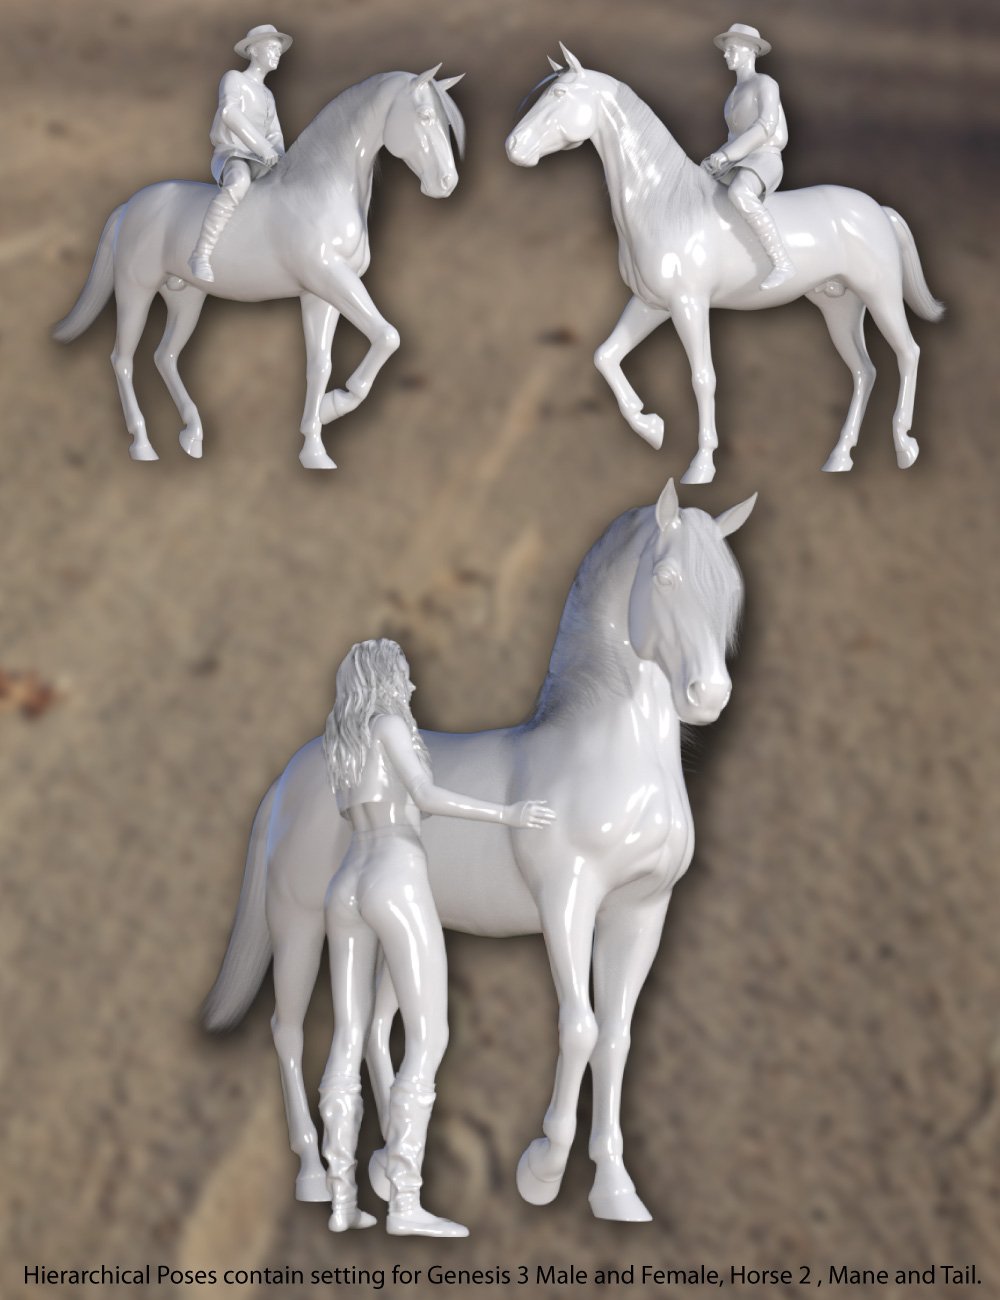 DA Horse and Rider Pose Set by: Design Anvil, 3D Models by Daz 3D